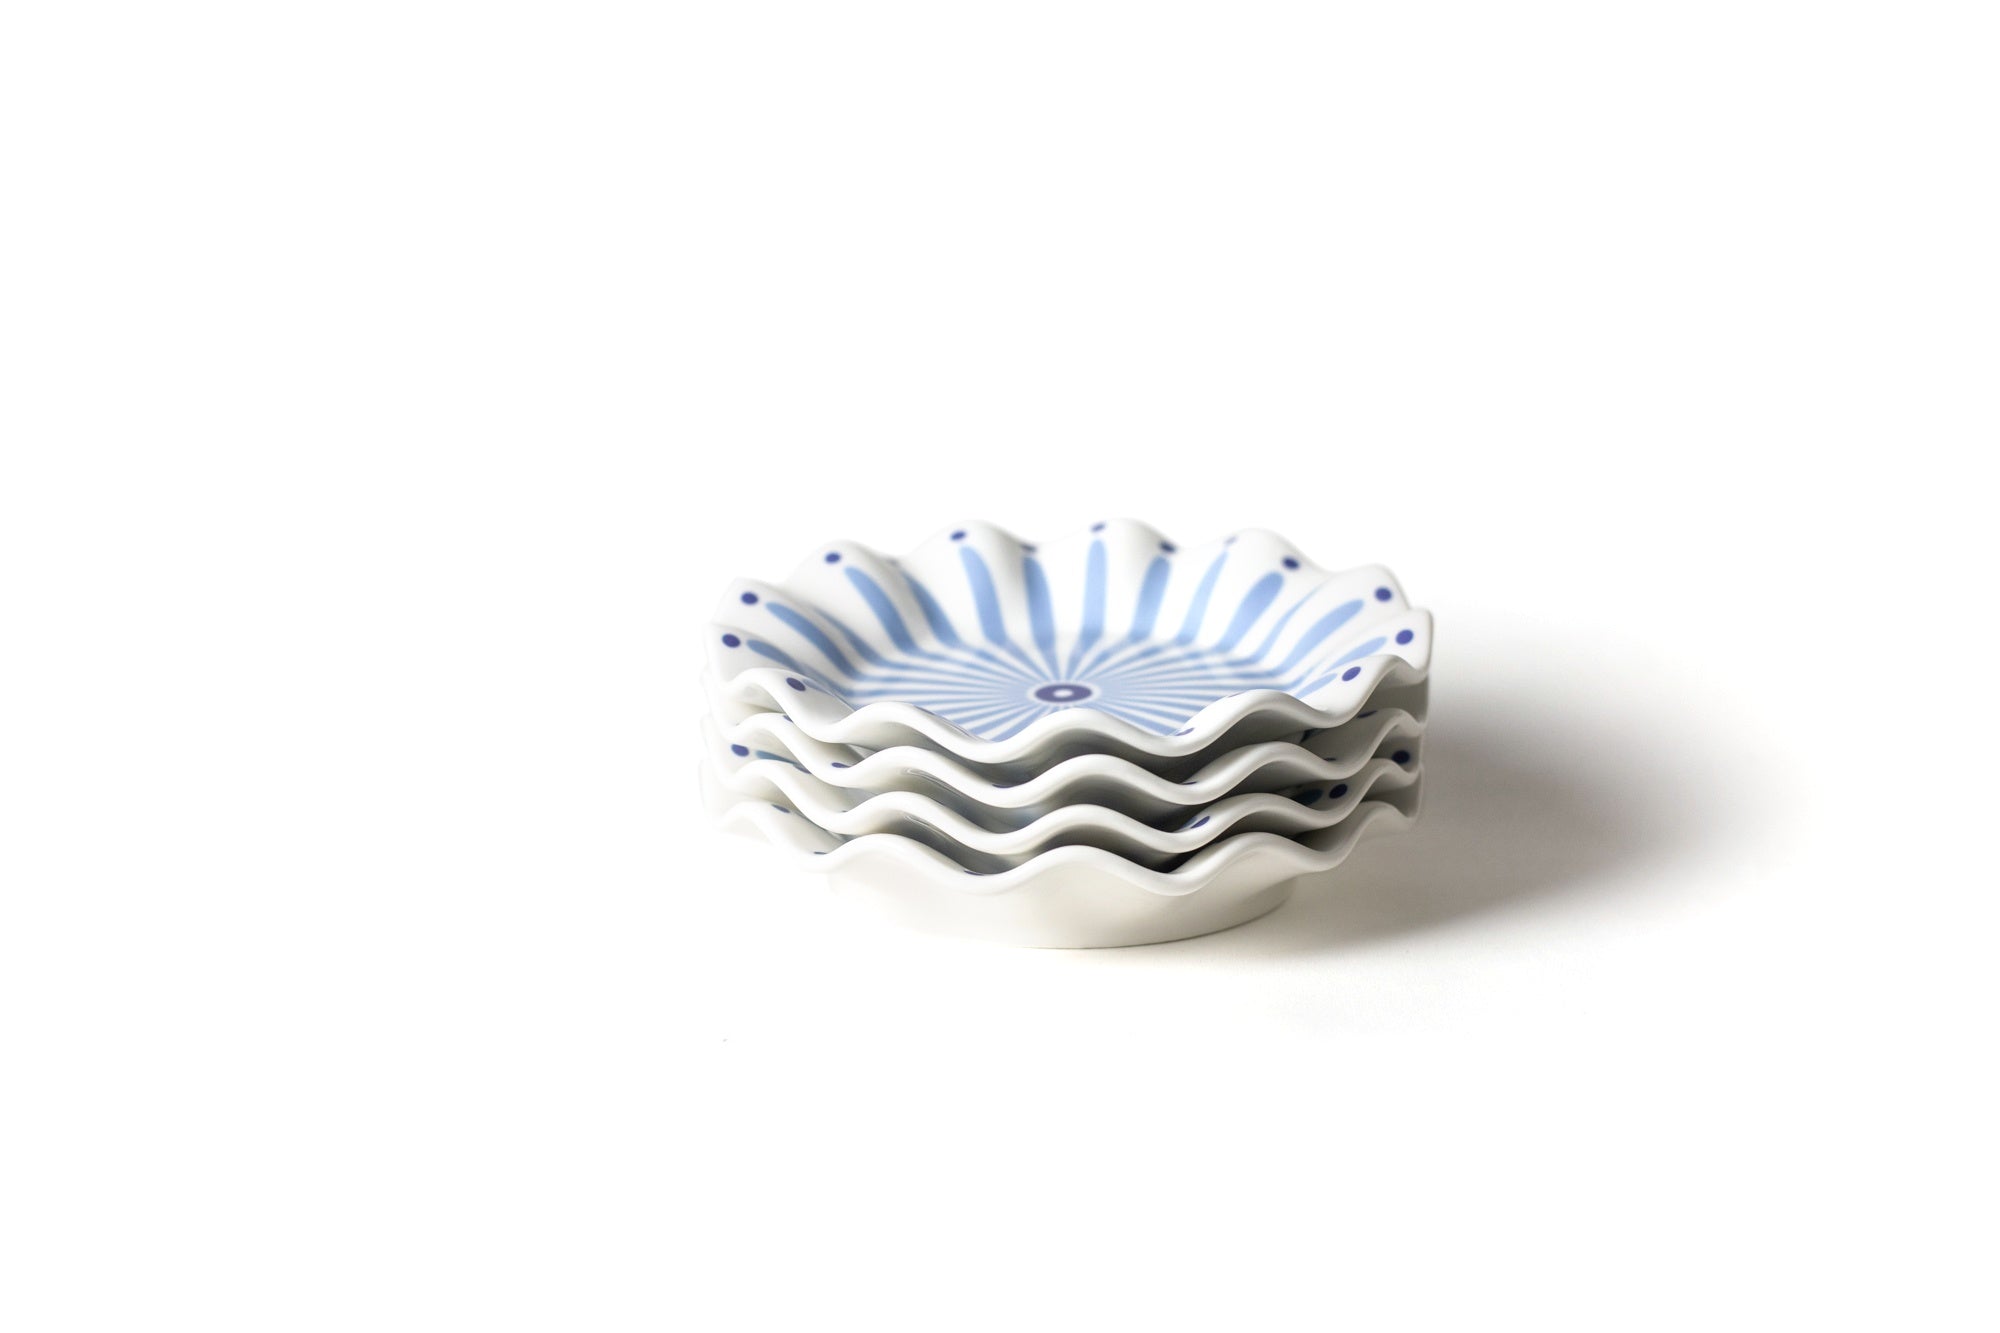 Front View of Neatly Stacked Iris Blue Burst Ruffle Salad Plate Set of 4 Showcasing Handcrafted Ruffled Edge and Unique Pattern